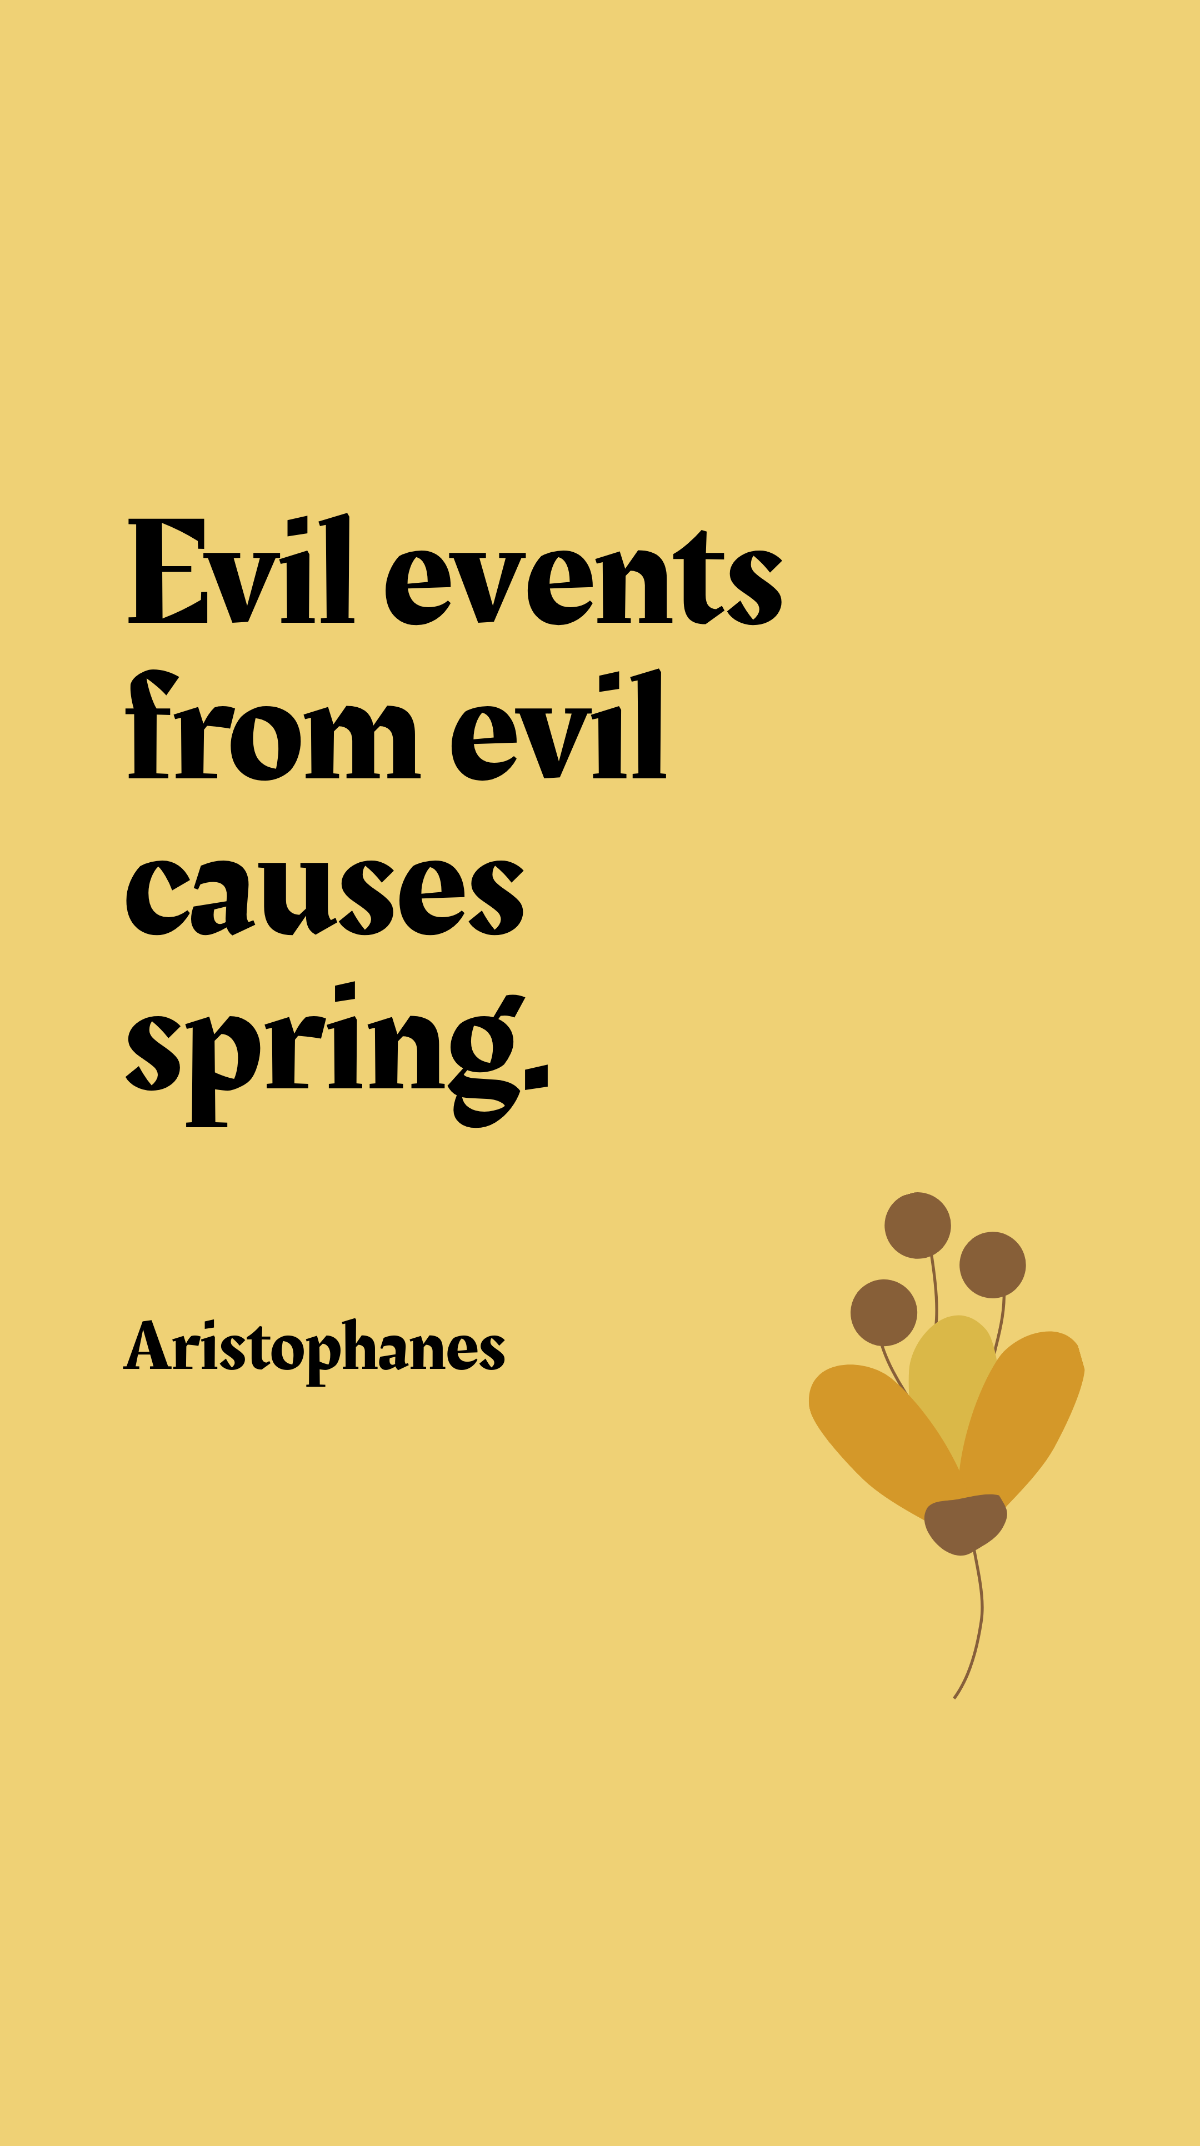 Aristophanes - Evil events from evil causes spring. Template